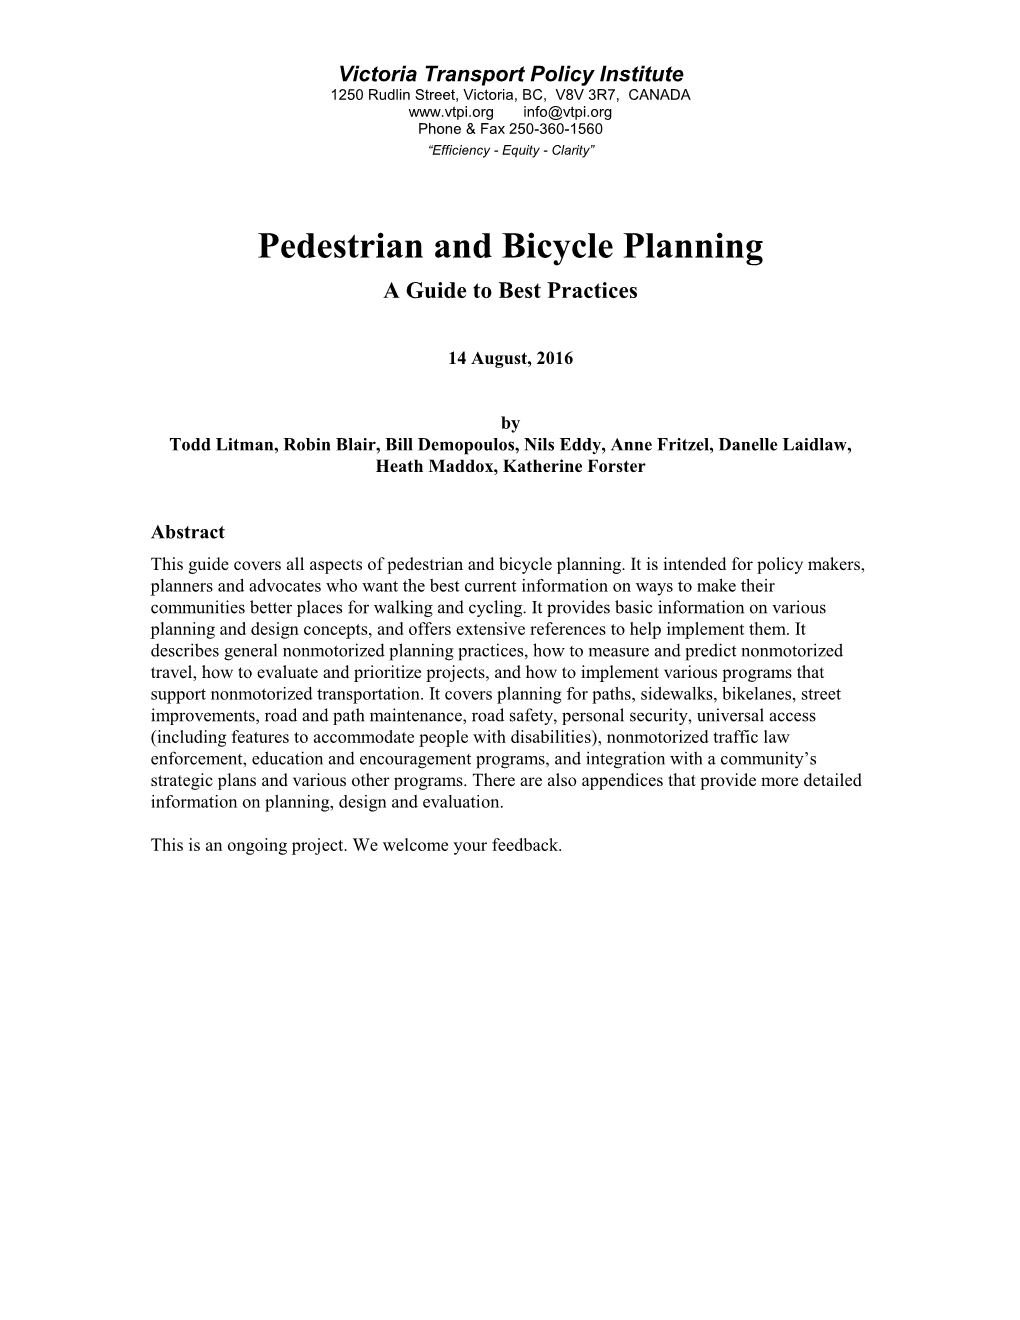 Pedestrian and Bicycle Planning a Guide to Best Practices